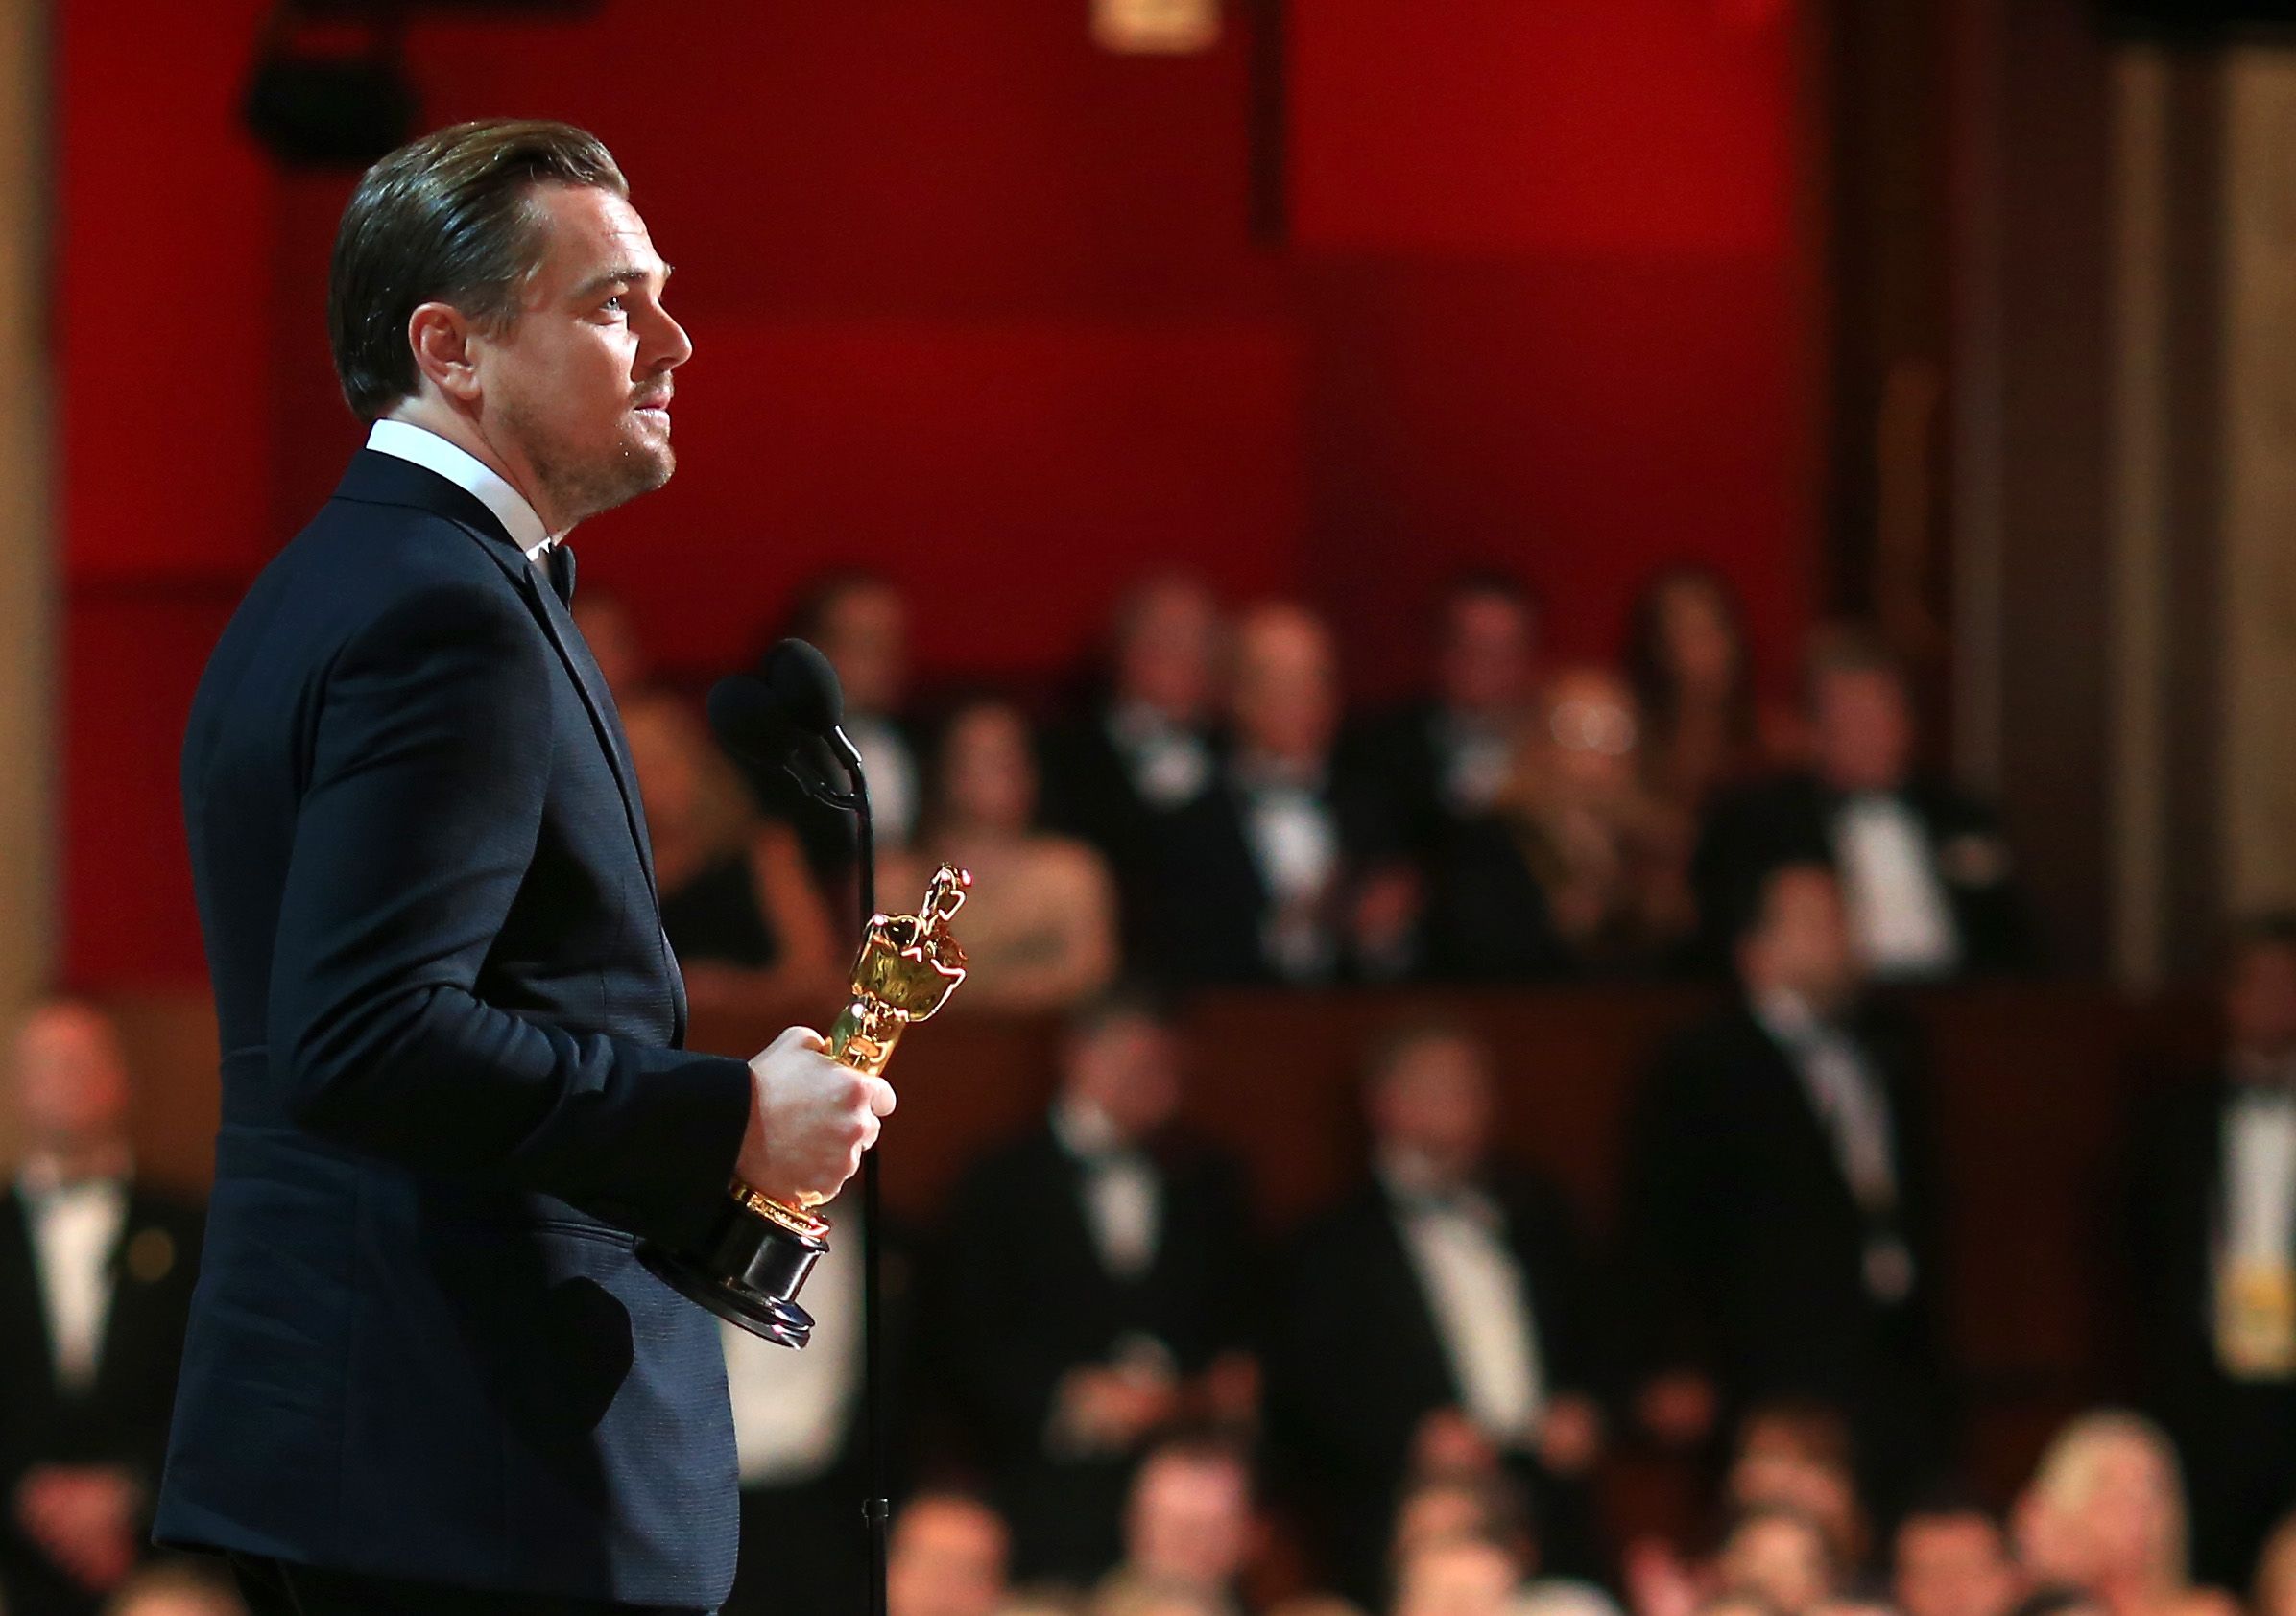 Leonardo DiCaprio accepts the Oscar for best lead actor in 2016.